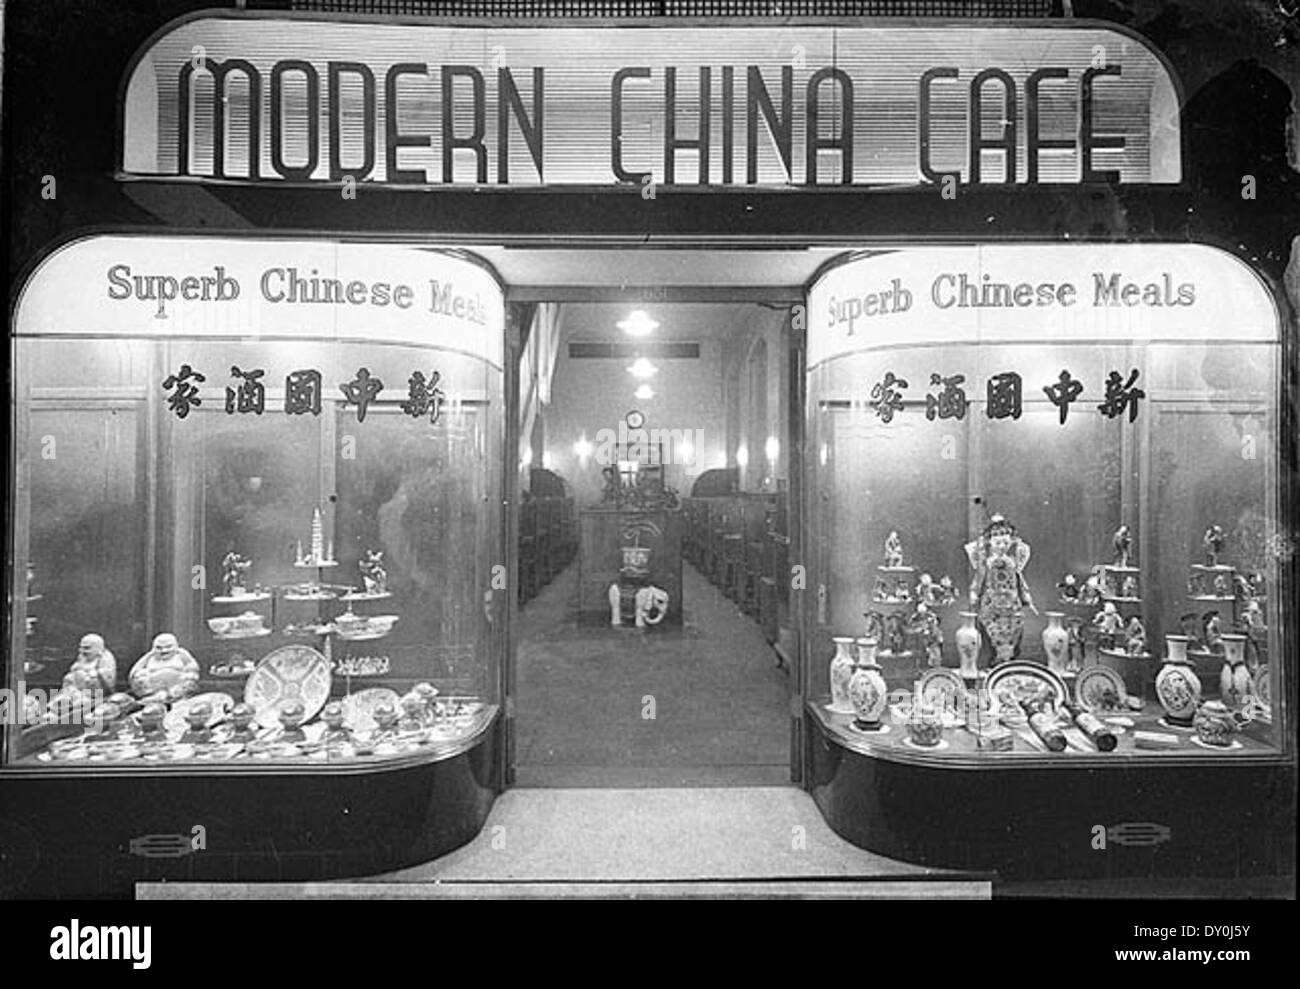 Modern China Cafe (Mr Pang), 651 George Street, 6th September 1949, by Sam Hood Stock Photo